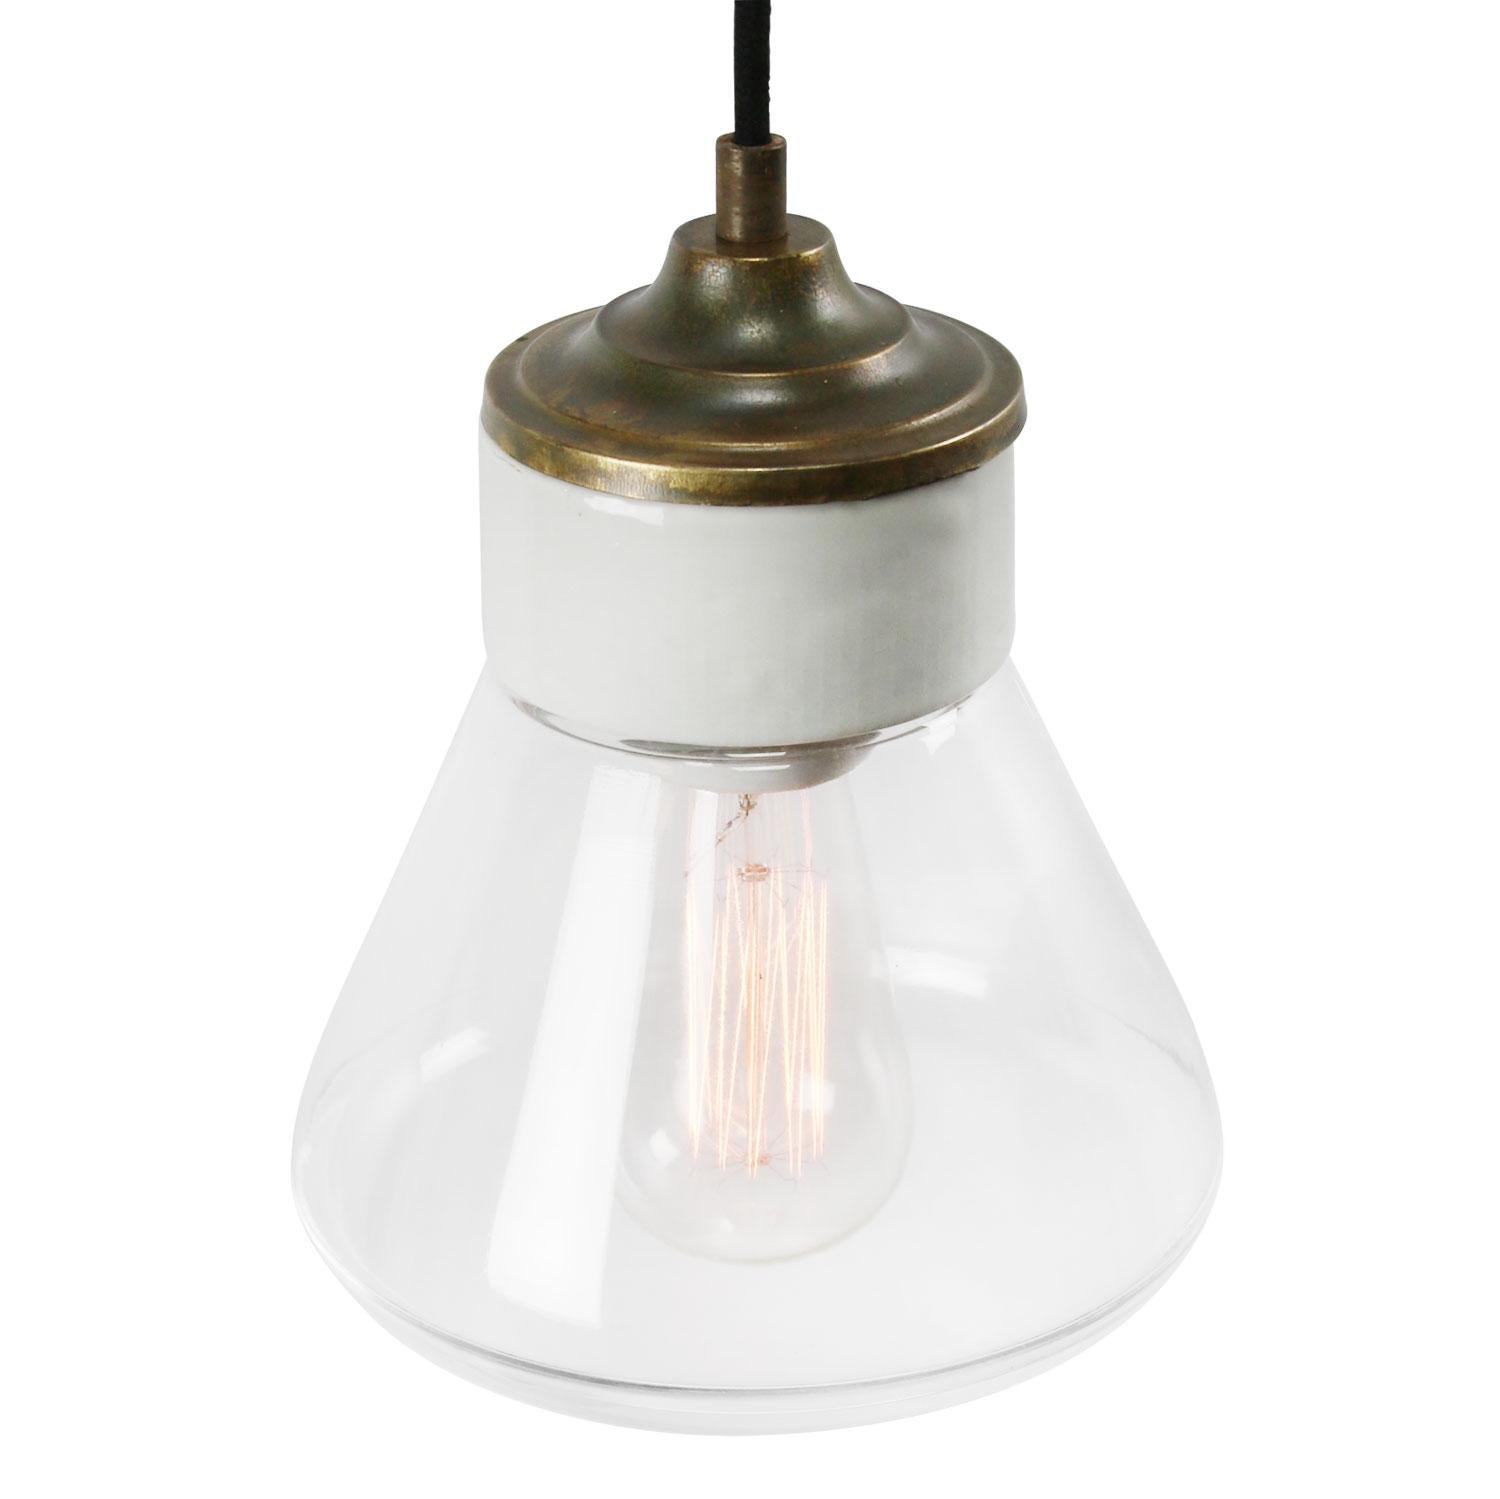 Porcelain industrial hanging lamp.
White porcelain, brass and clear glass.
Wired for 110 volt or 220 volt
2 conductors, no ground.

Weight: 1.40 kg / 3.1 lb

Priced per individual item. All lamps have been made suitable by international